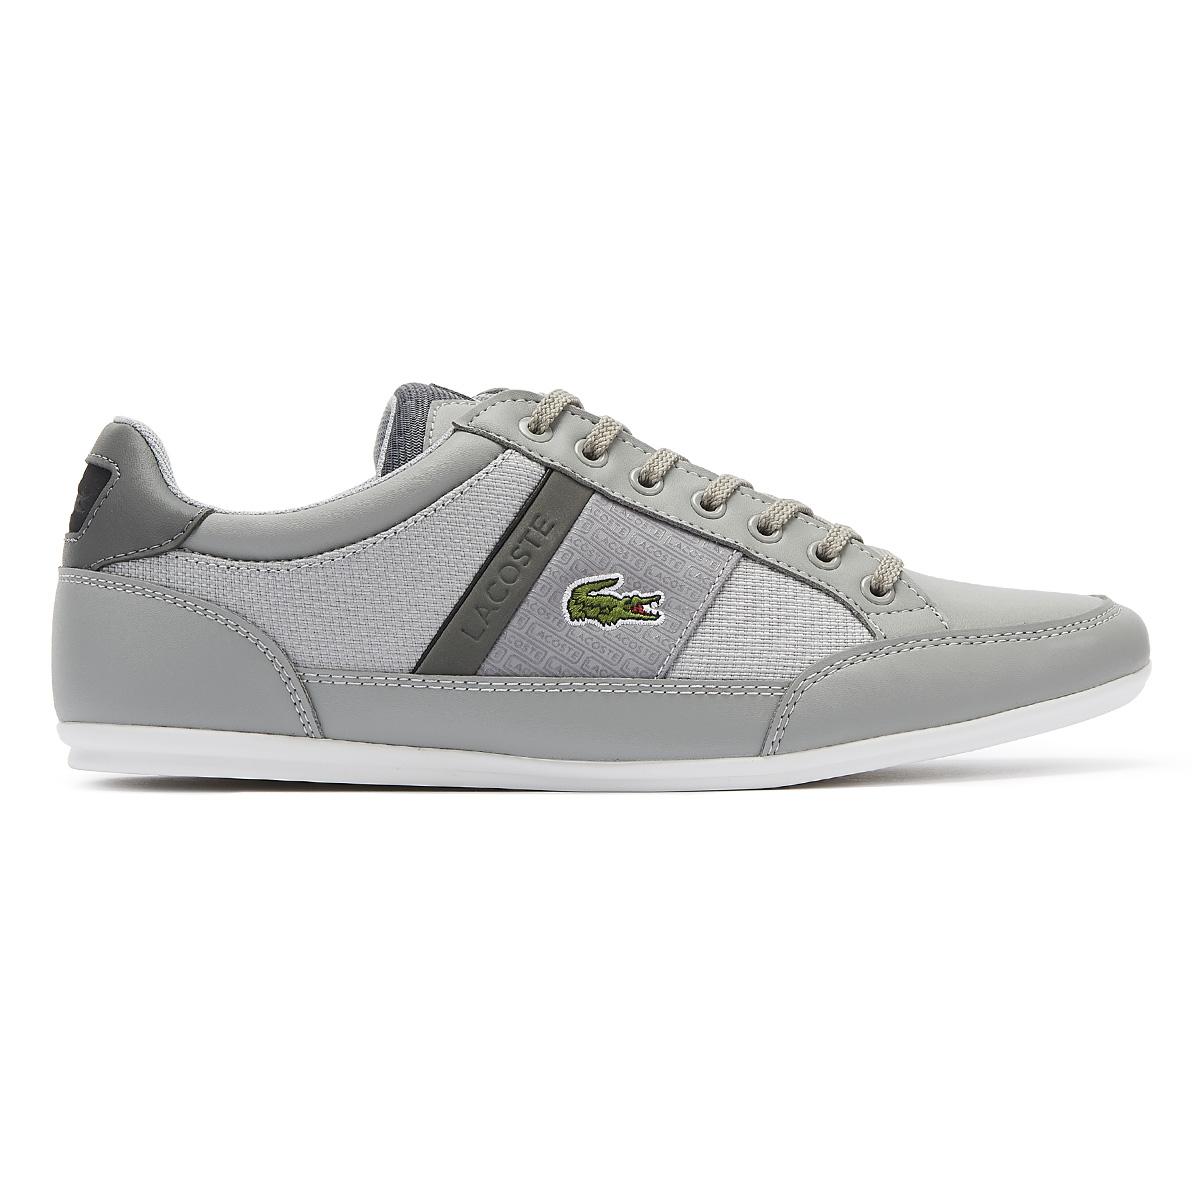 Lacoste Chaymon 319 3 Shoes (trainers) in Grey (Gray) for Men - Lyst